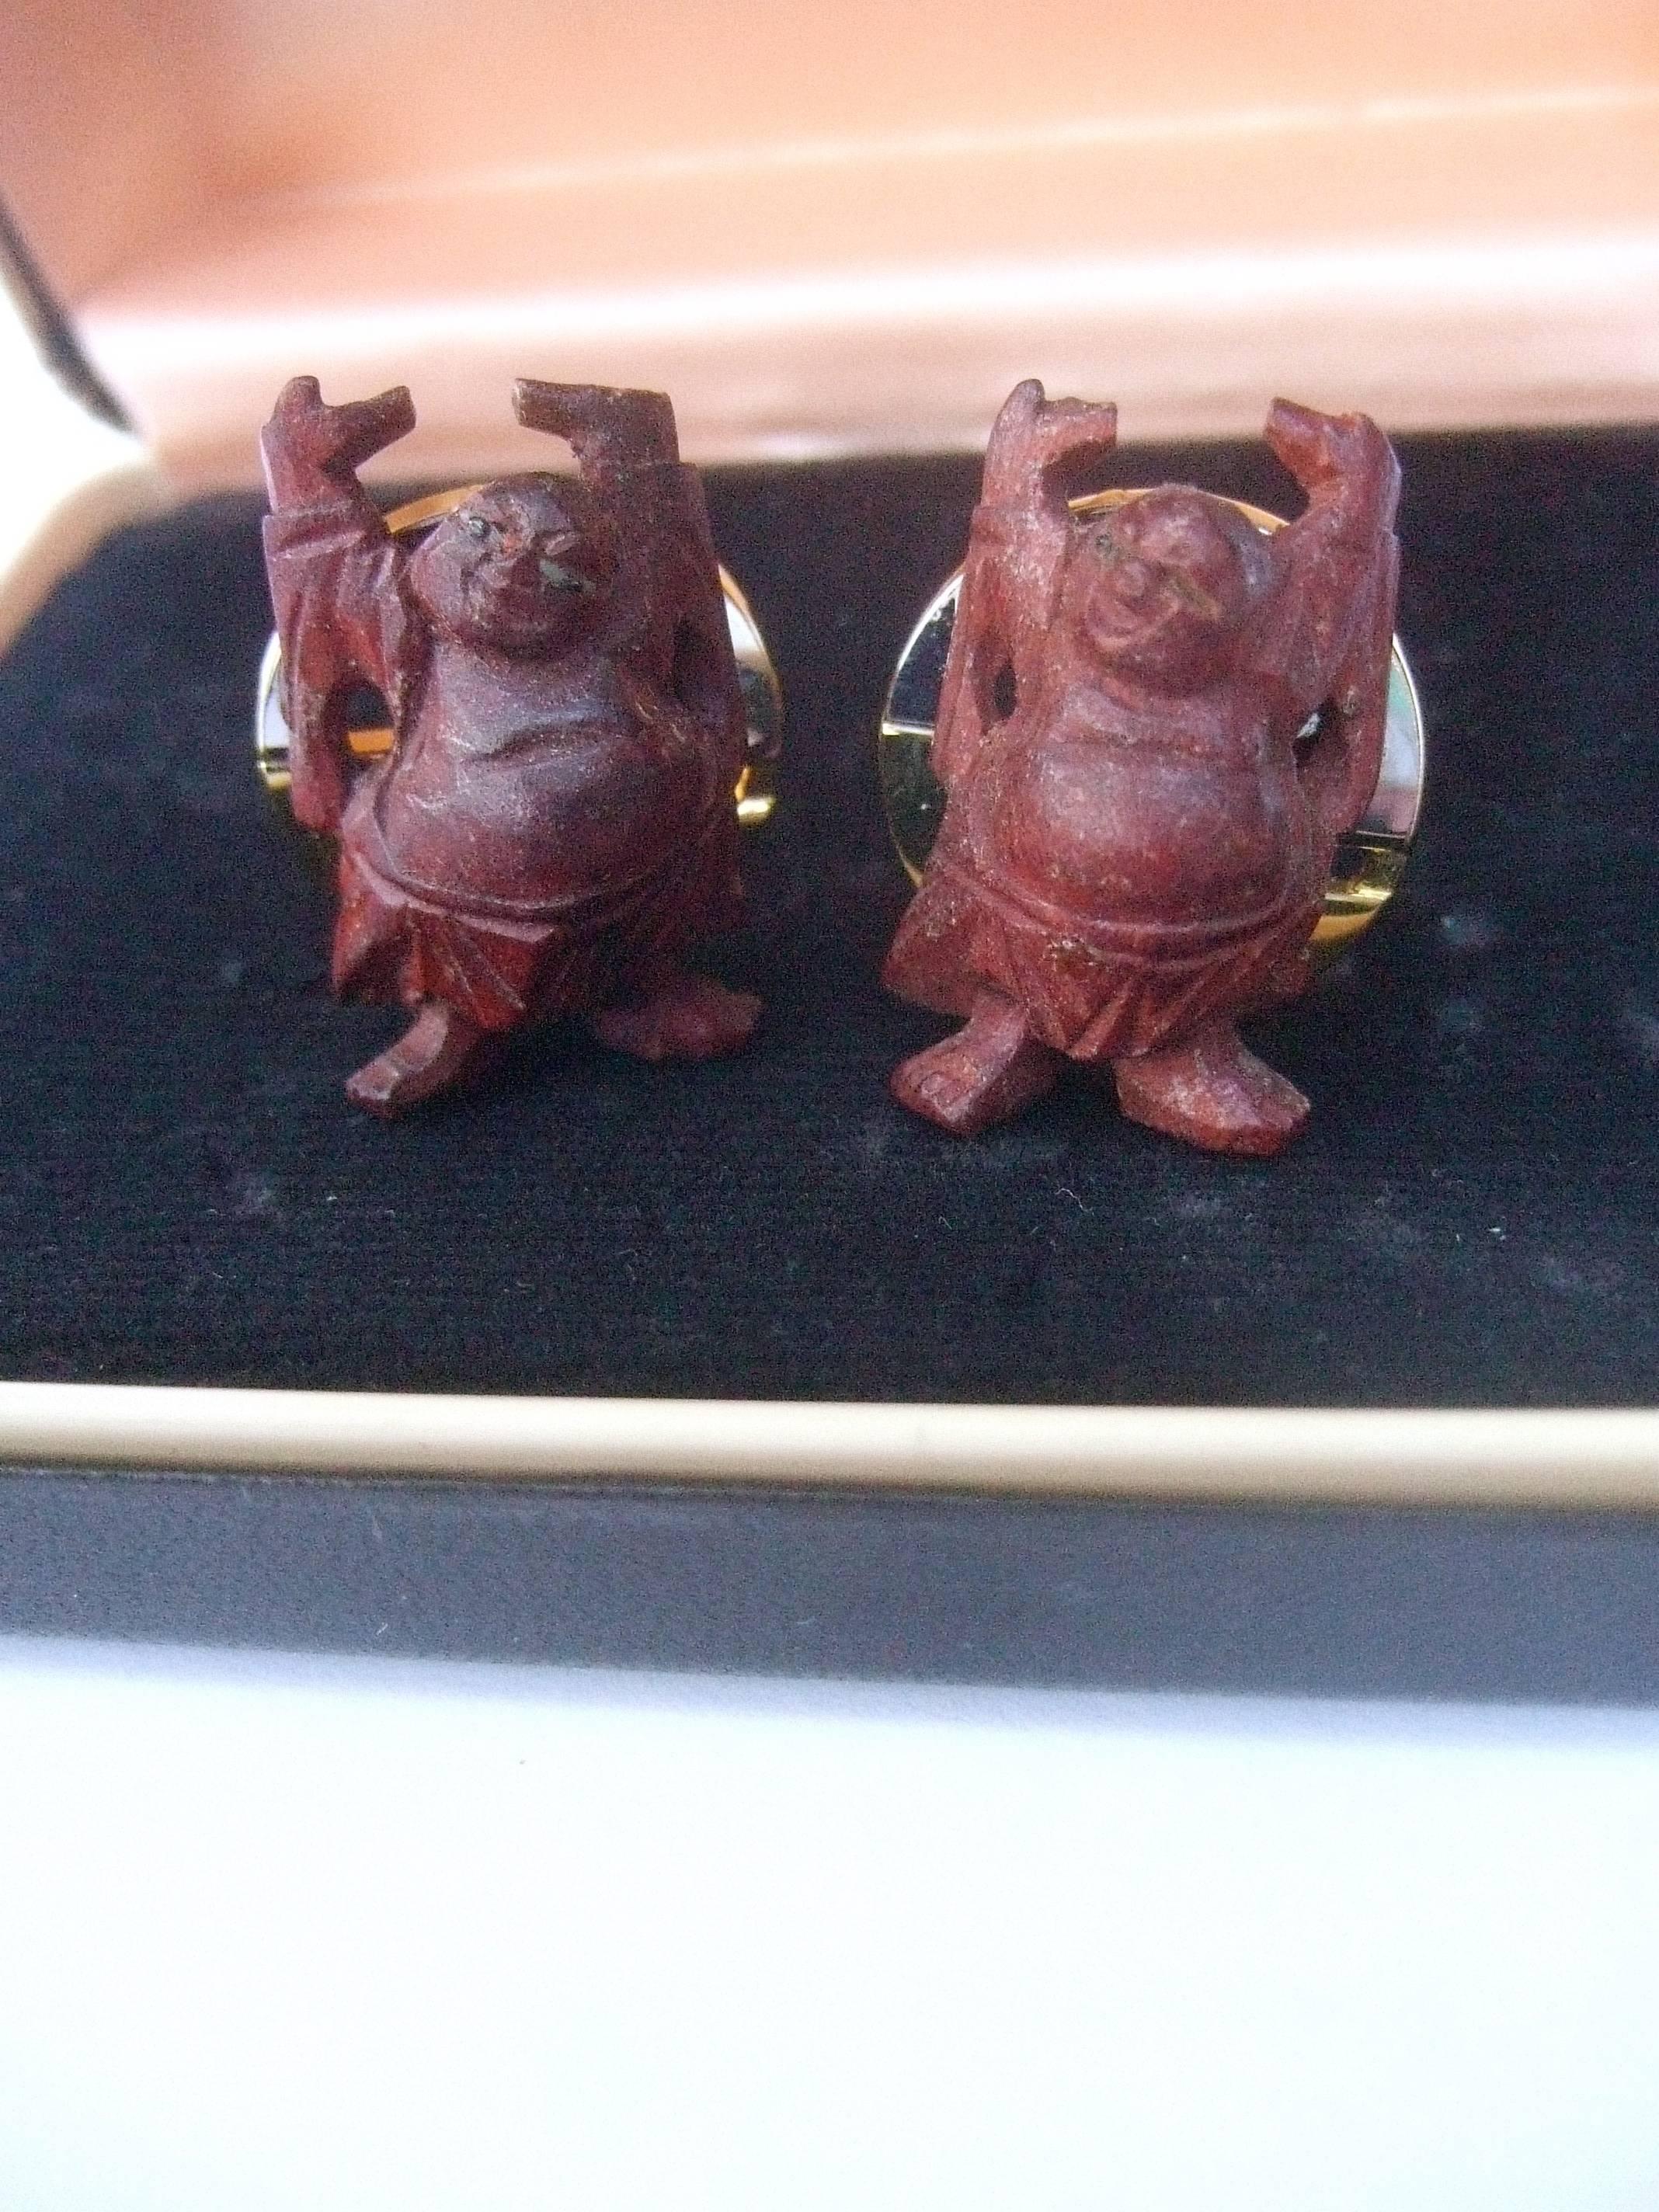 Pierre Cardin carved wood buddha cufflinks in Pierre Cardin box c 1970s 
The unique figural cufflinks are carved in the shape of buddha figures
The buddha figures are mounted on gilt metal cufflink backings
Each of the cufflinks is inscribed with